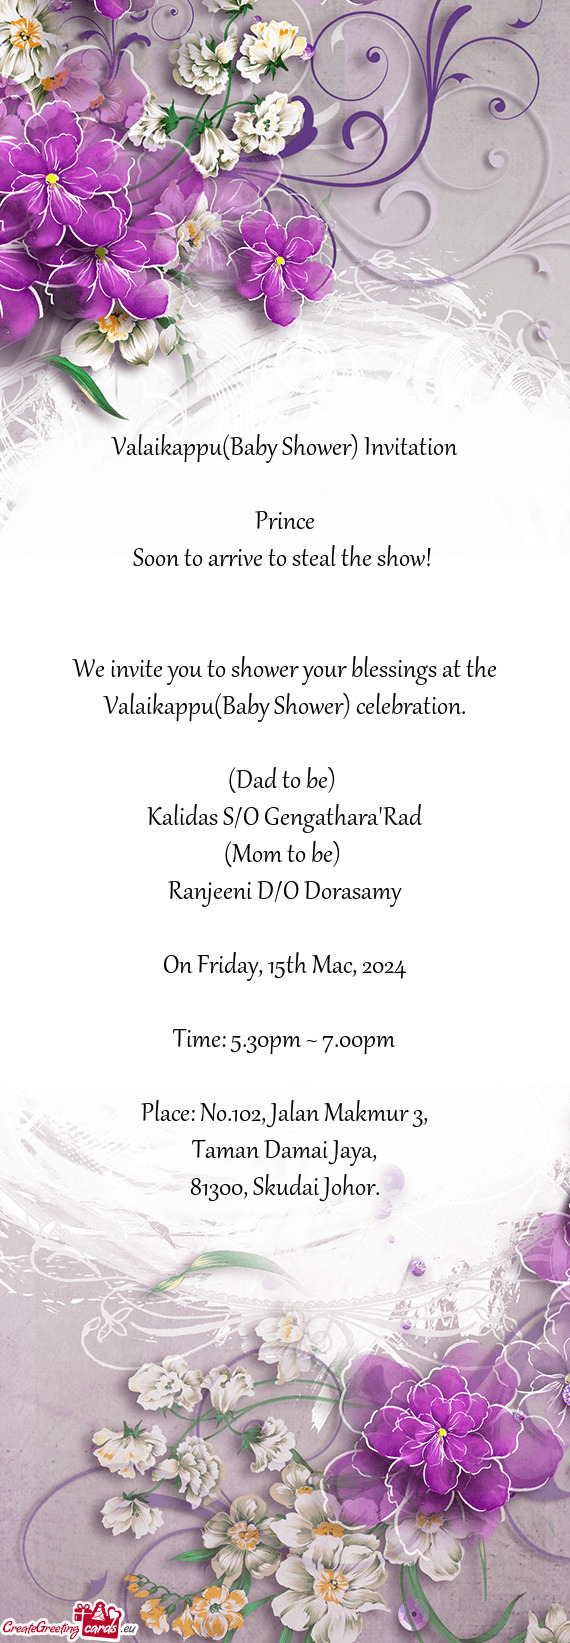 We invite you to shower your blessings at the Valaikappu(Baby Shower) celebration